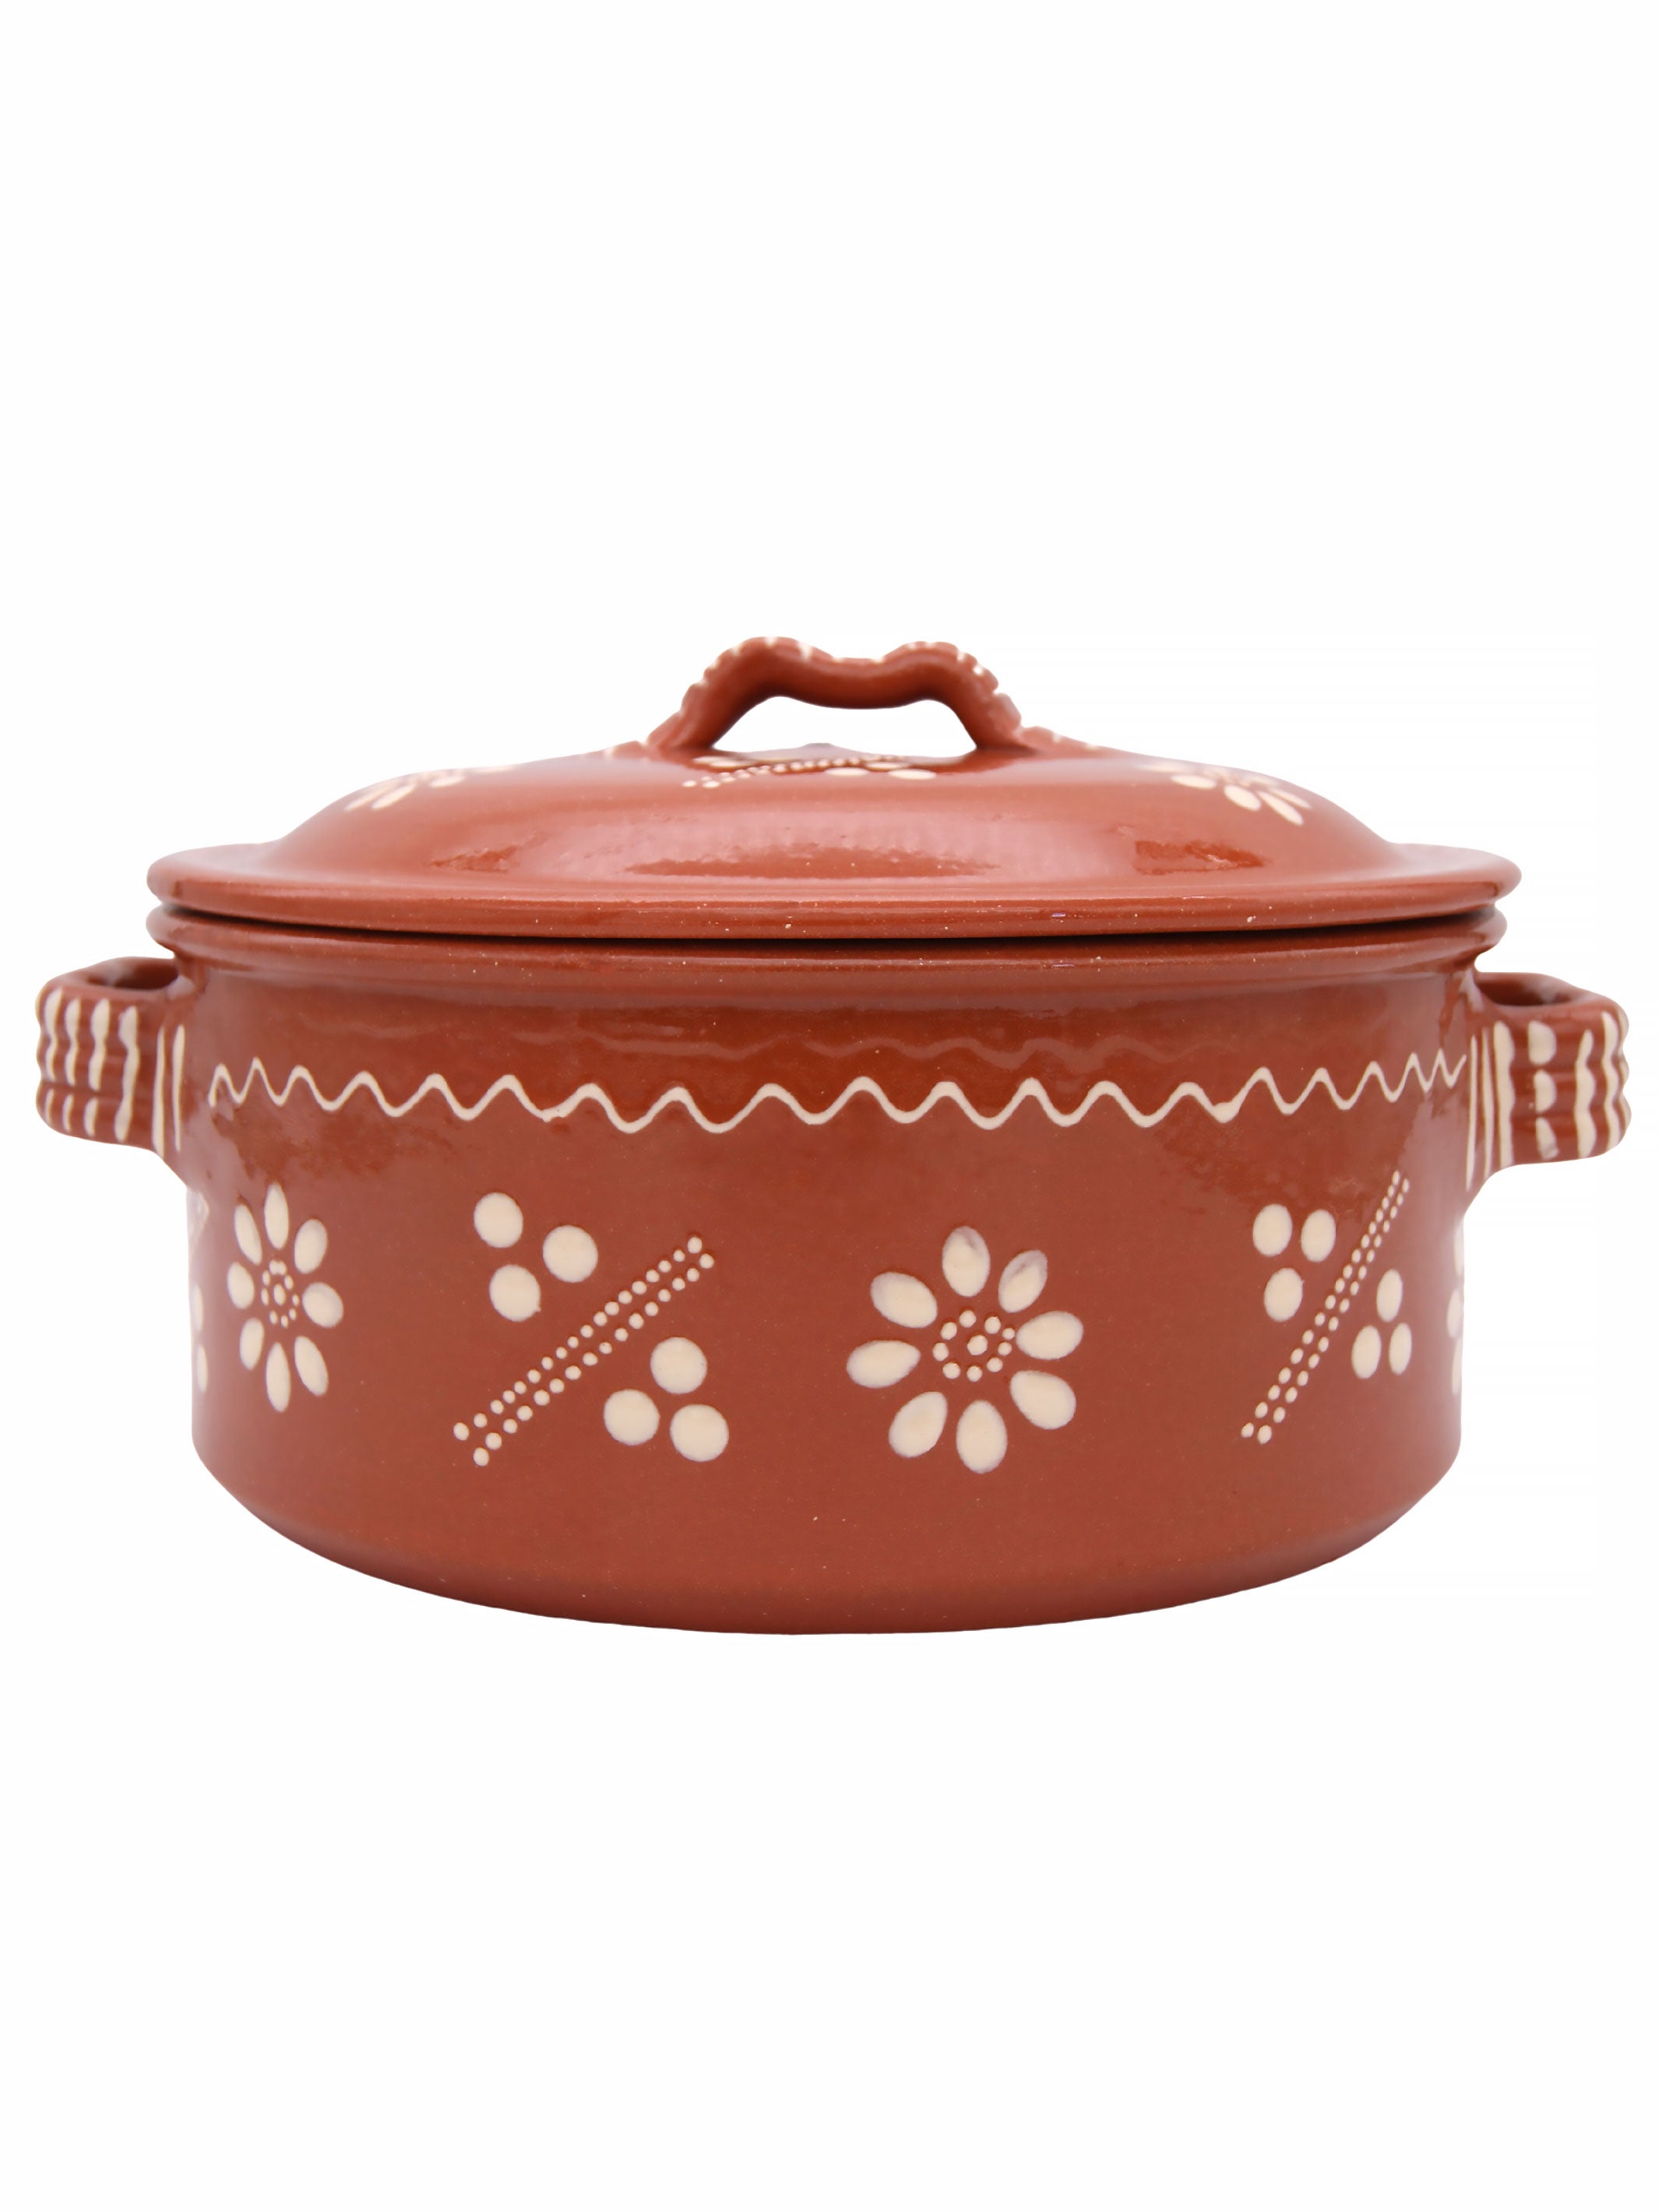 Portuguese Pottery Terracotta Glazed Clay Cooking Pot With Lid